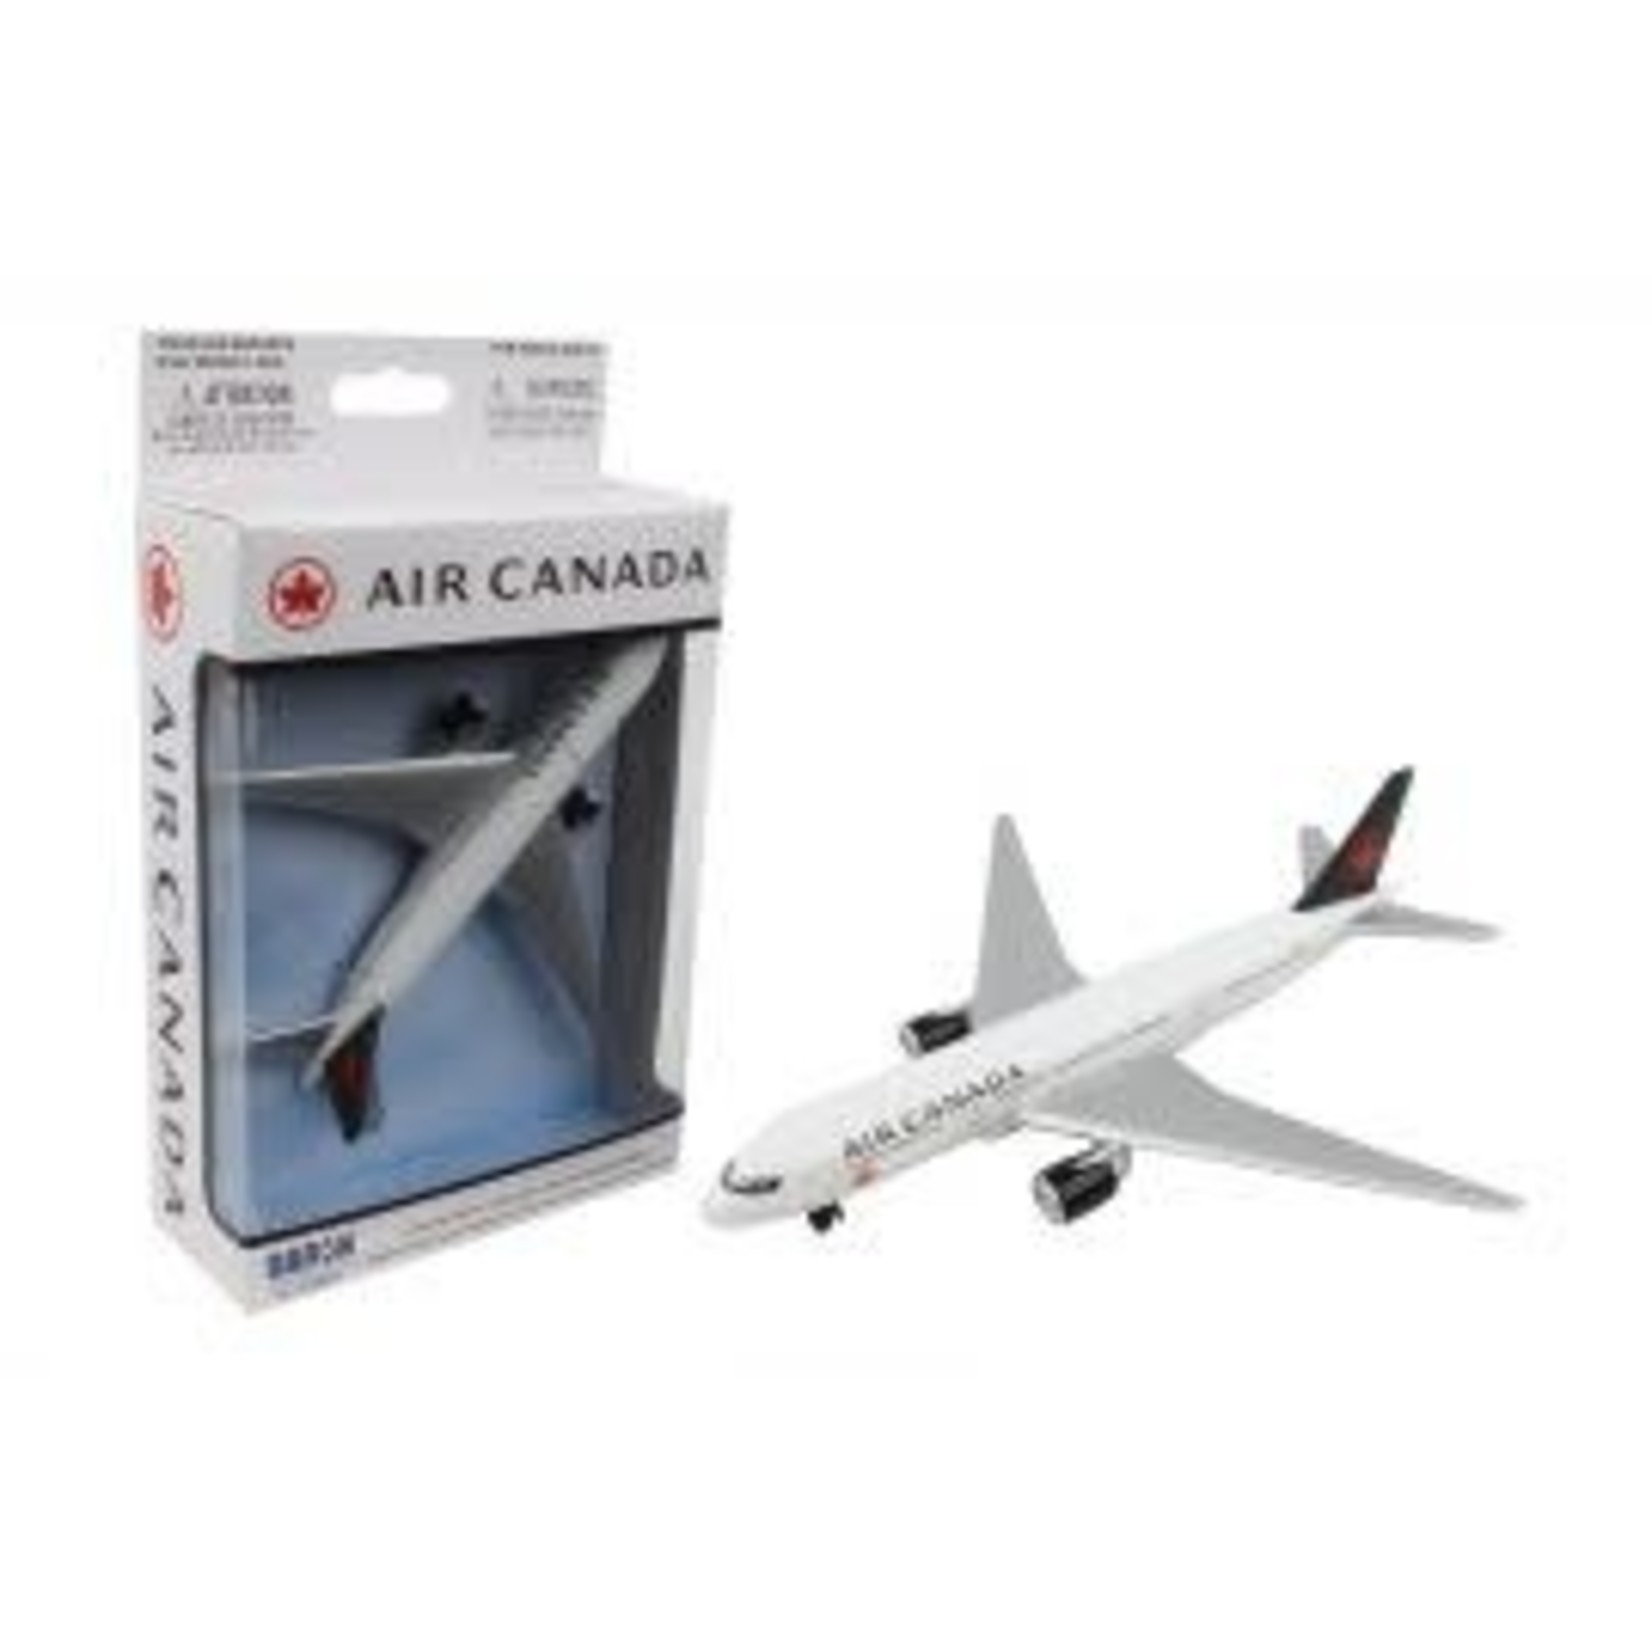 Aviation and Space Air Canada die cast Plane